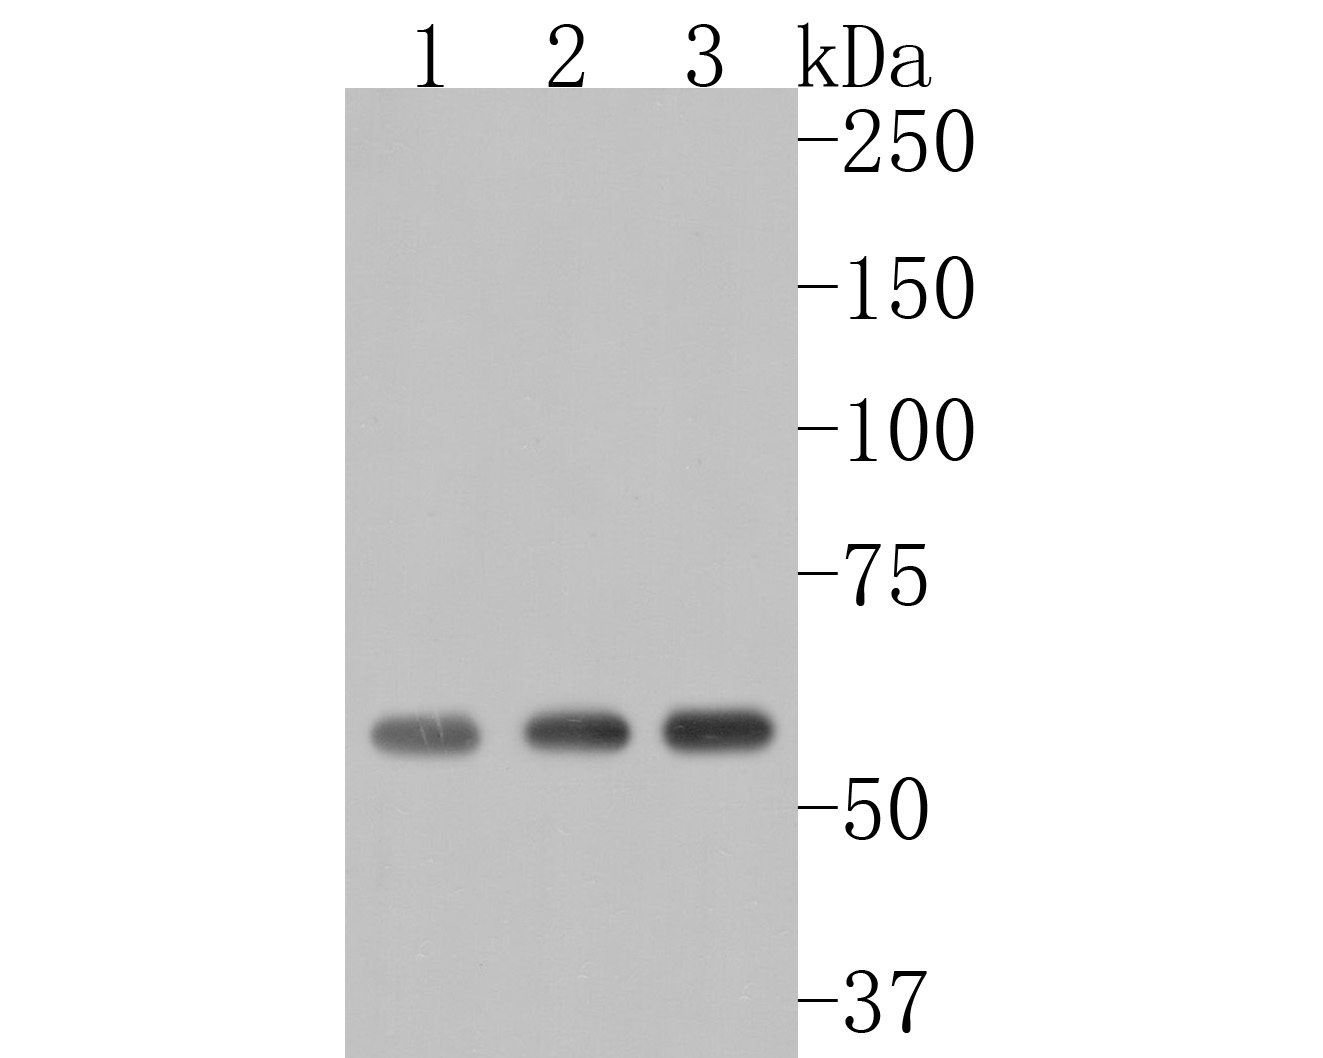 Western blot analysis of AKT2 on different lysates. Proteins were transferred to a PVDF membrane and blocked with 5% BSA in PBS for 1 hour at room temperature. The primary antibody (HA500091, 1/500) was used in 5% BSA at room temperature for 2 hours. Goat Anti-Rabbit IgG - HRP Secondary Antibody (HA1001) at 1:5,000 dilution was used for 1 hour at room temperature.<br />
Positive control: <br />
Lane 1: A549 cell lysate<br />
Lane 2: Hela cell lysate<br />
Lane 3: A431 cell lysate